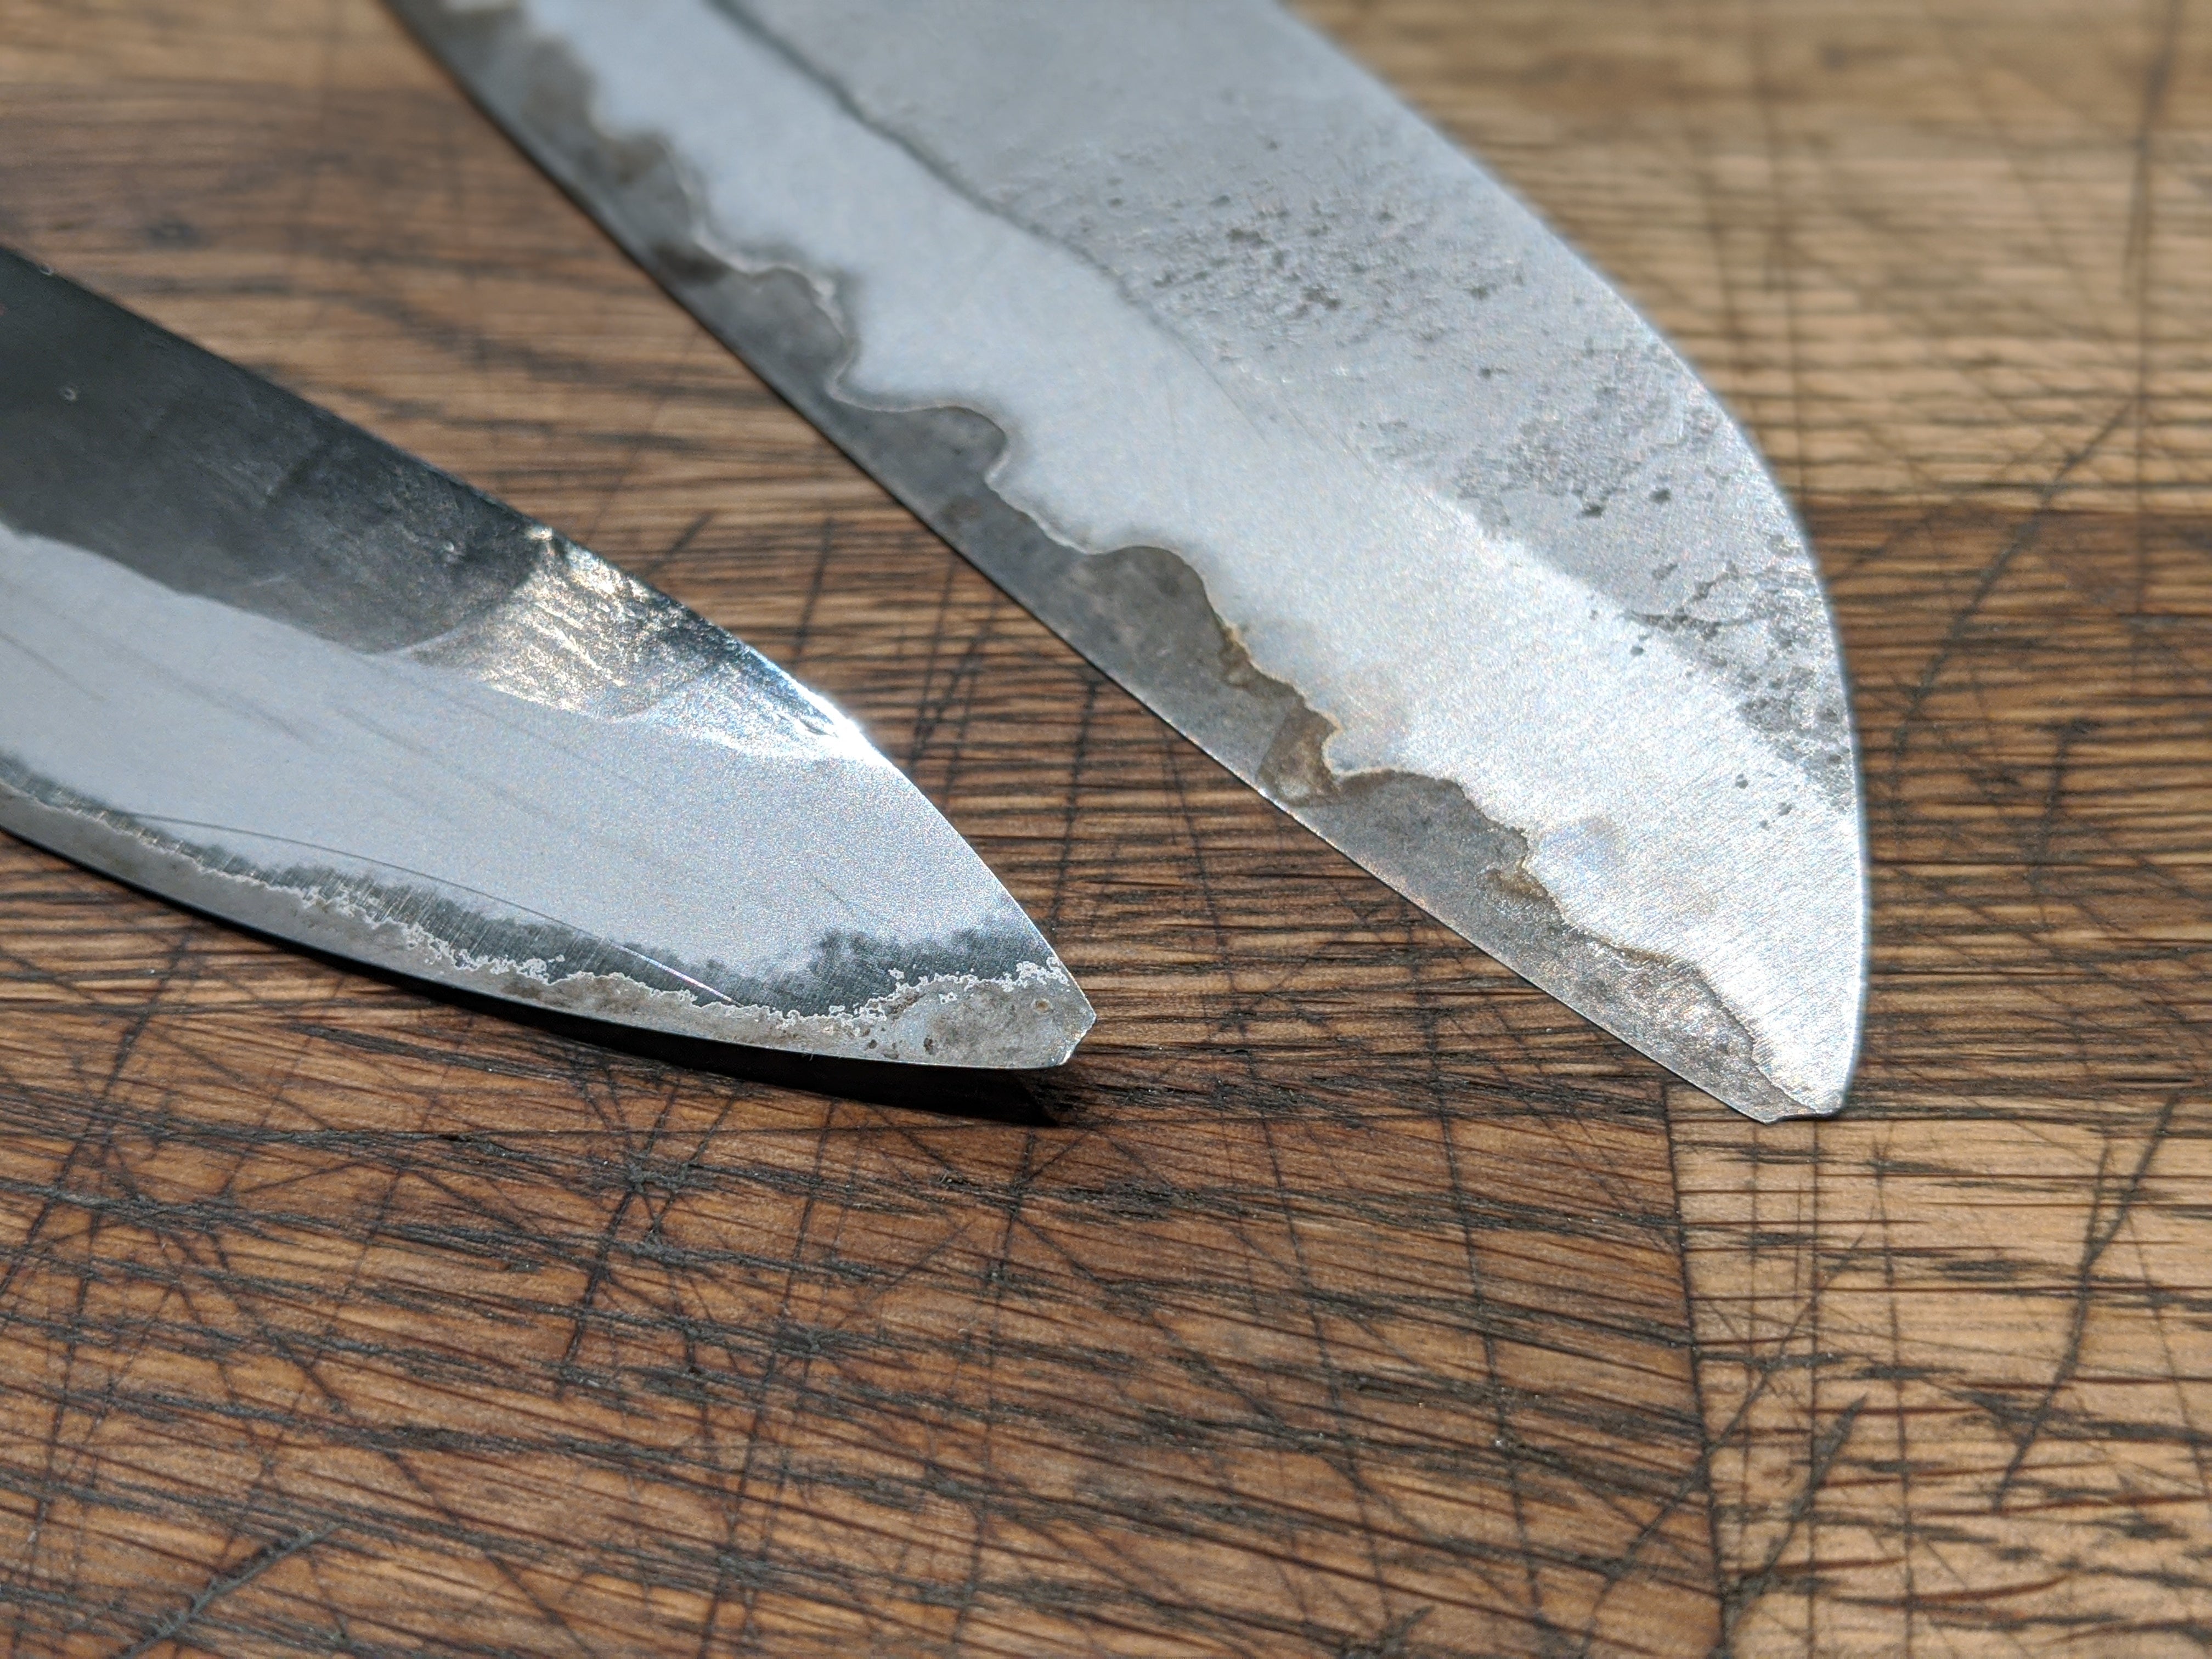 Knife Aid Review: A Decent, but Not Great, Mail-in Sharpening Service